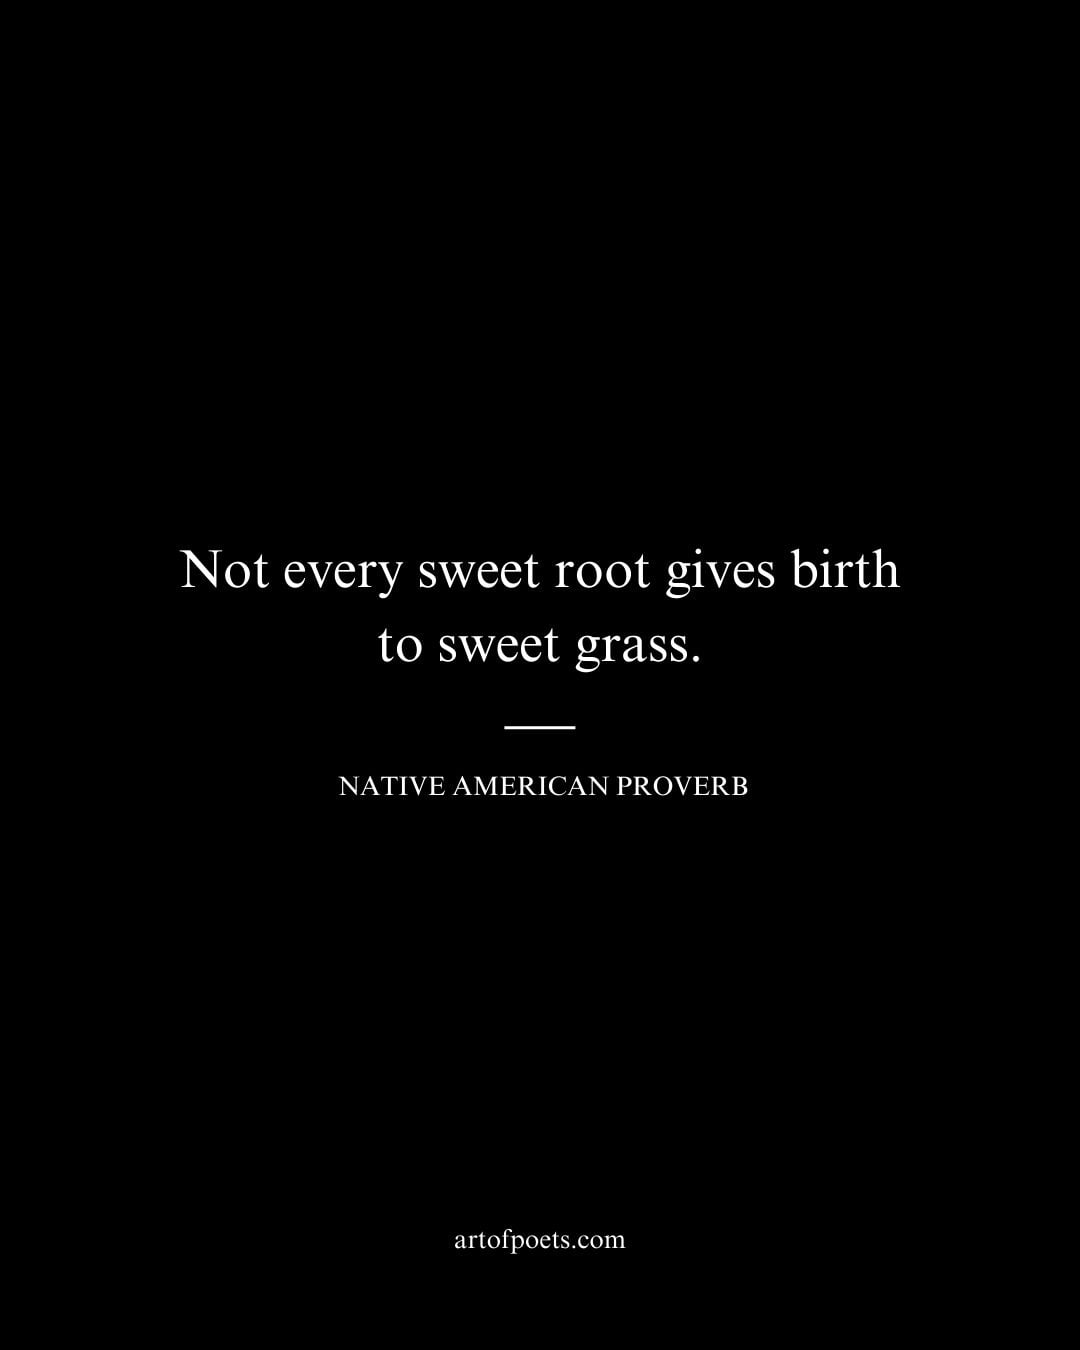 Not every sweet root gives birth to sweet grass 1